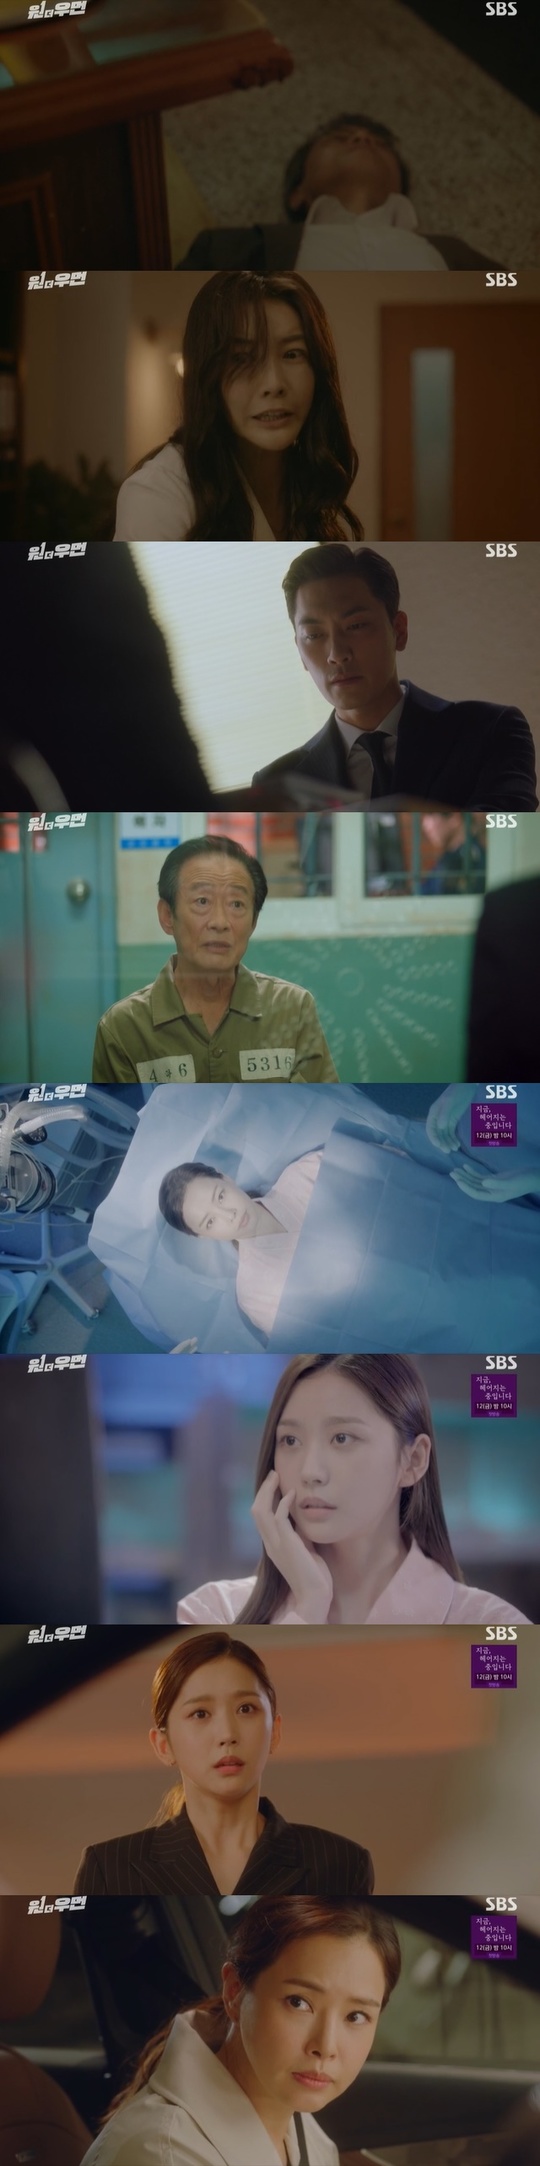 The Identity of the Travel Secretary was Conglomerate Lee Ha-nui, who had been plasticized.In the 14th episode of SBS gilt drama One the Woman (played by Kim Yoon and directed by Choi Young-hoon), which was broadcast on October 30, Han Sung-hye (Jin Seo-yeon) and Ryu Seung-deok (played by Kim Won-hae) held hands and pushed Han Young-sik (played by Jeon Guk-hwan) and Cho Yeon-ju (played by Lee Ha-nui) into crisis.While Han Young-sik was first caught by the prosecution for internal accusations, Cho Yeon-ju was sued by Kang Eun-hwa (played by Hwang Young-hee) for impersonating Conglomerate Chairman Kang Mi-na (played by Lee Ha-nui).Ryu Seung-deok tried to tie his hands and feet completely by disposing of the two-month suspension of the prosecution for damages to the dignity of the prosecution.The supporting actor immediately followed Ryu Seung-deok and asked, Do you think one prosecutor can beat Conglomerate?However, the USB hidden by Ryu Seung-deok was already in the hands of the supporting actor. The USB acquired by the supporting actor contained CCTV at the Hanju factory on the day of the arson 14 years ago.Cho Yeon-ju and han seung-wook, who checked CCTV, witnessed the shocking truth.In the video, Han Sung-hye was carefully escaping from the fathers room of Han Seung-wook.Following this Han Sung-hye, Jung Do-woo (played by Kim Bong-man) dragged his father, Han Seung-wook, who had already fallen, out of the corridor.At that time, han seung-wooks father revealed that Han Sung-hye was the one who knocked down the fire so that he could not escape.The truth of the day was revealed later: Han Sung-hye admonished with an account book manipulated by his father, and when he tried to take the book out, he was scrambling about the book.During this process, Han Sung-hye pushed his father, Han Seung-wook, and his father, han seung-wook, fell down with his head on his desk.Han Sung-hye had to deal with the situation. Han Sung-hye ordered, Resolve this factory, burn it down, or whatever it is. The arson was also done by Han Sung-hye.On this day, Han Sung-hye mentioned to Jung Woo that Ryu Seung-deok holds the factory CCTV as a weakness. On the day when the inspector reveals the CCTV, I will be a little troubled, so there is no one who can protect you.How do you want to do it?The supporting actor Kang Mi-na impersonation case has been rushed to the warrant review, even in a situation where he could face charges of Kang Mi-na murder.Han Sung-hye has already killed a couple who have already caused a traffic accident in the supporting actor, and has removed the way out of the supporting actor.In addition, a new crime in the fire at the Seopyeong factory embroidered. He was under pressure from Han Sung-hye before Baro.Jung Do-u was the one who covered himself with the murder of his father, a factory arson, and even the hit-and-run charge of his grandmother Cho Yeon-ju.After that, the supporting actor wanted to find Kang Mi-na, which is still a few pros to fight back immediately, and a real answer.So Cho Yeon-ju started to think about what kind of person the real Kang Mi-na was.Han Seung-wook knows that the real Kang Mi-na was a much stronger person than he thought.Cho is worried about why Kang Mi-na does not appear even after becoming the head of the group. The woman is near Han Sung-hye.Who is the new person around Han Sung-hye right after the accident? The only person who fully met Cho Yeon-jus guess was Baro Han Seong-hyes travel secretary.And likewise, Han Sung-hye, who suspected such a secretary, urged her to eat nuts that Kang Mi-na had allergies.The secretary finally ate nuts, but Han Sung-hye pressed the secretary by pushing out a paternity test paper with the hair of the secretary.